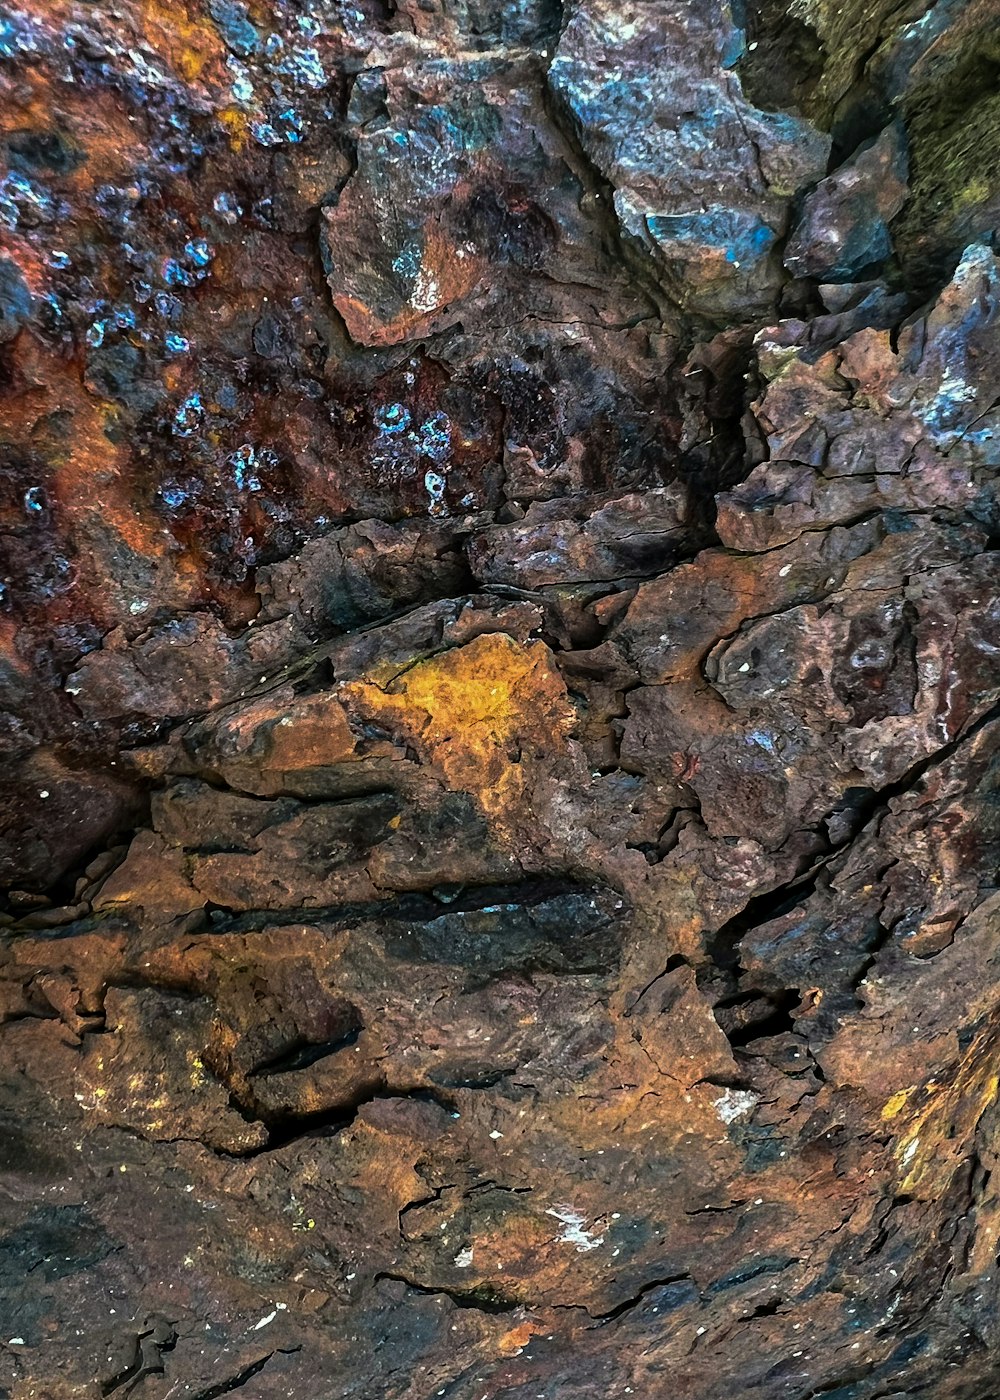 a close up of a rock with a yellow and blue substance on it